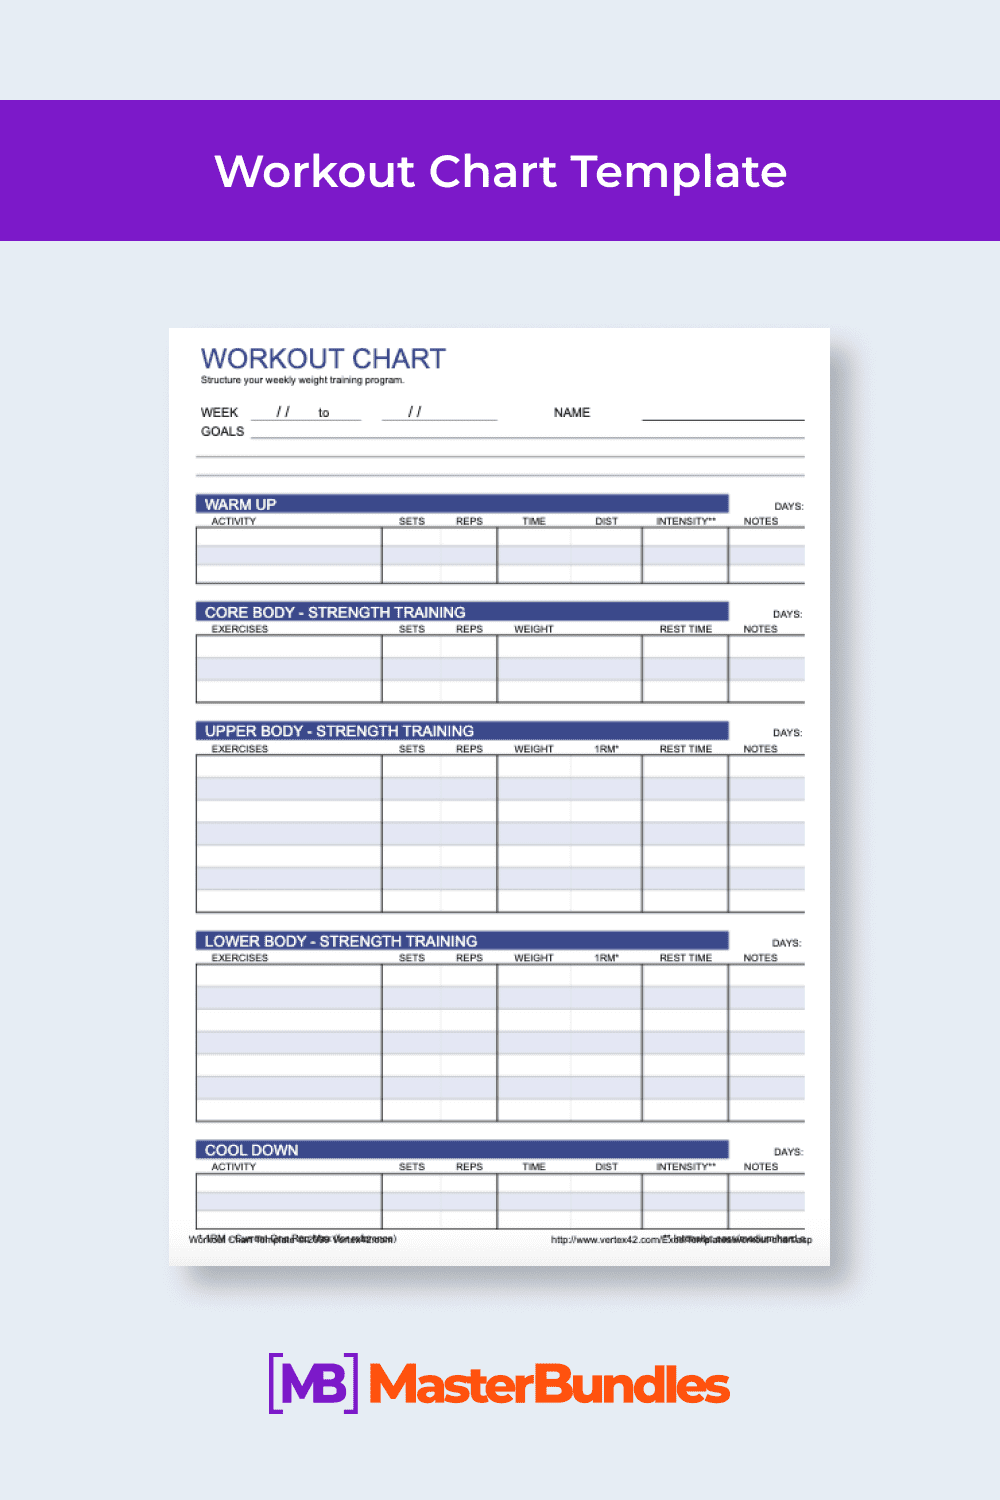 A very detailed planner for the most responsible.